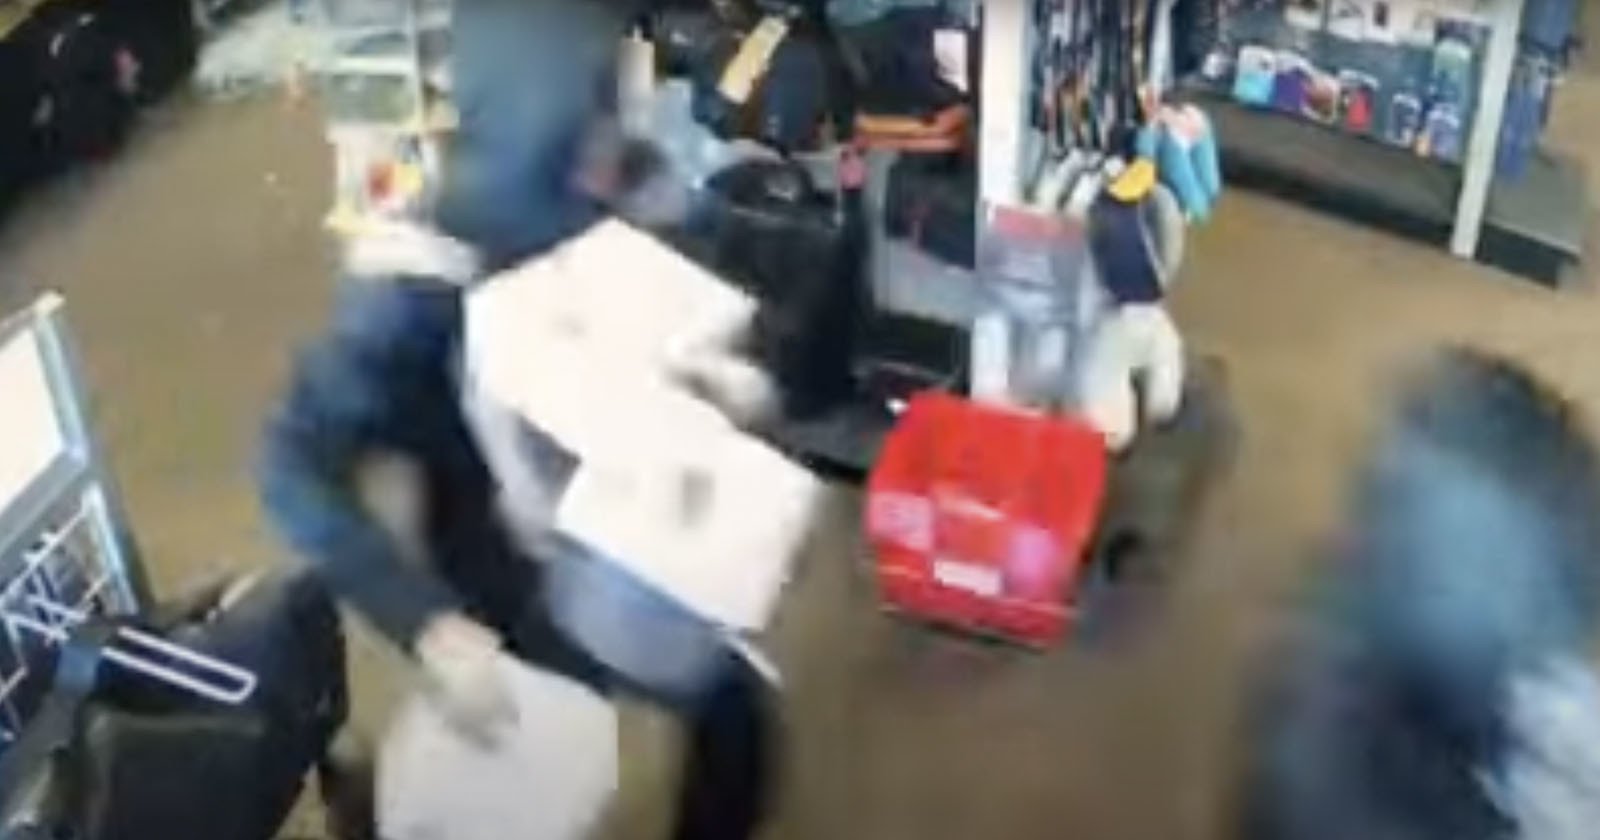 Armed Robbers Steal $80K Worth of Cameras from San Francisco Area Store